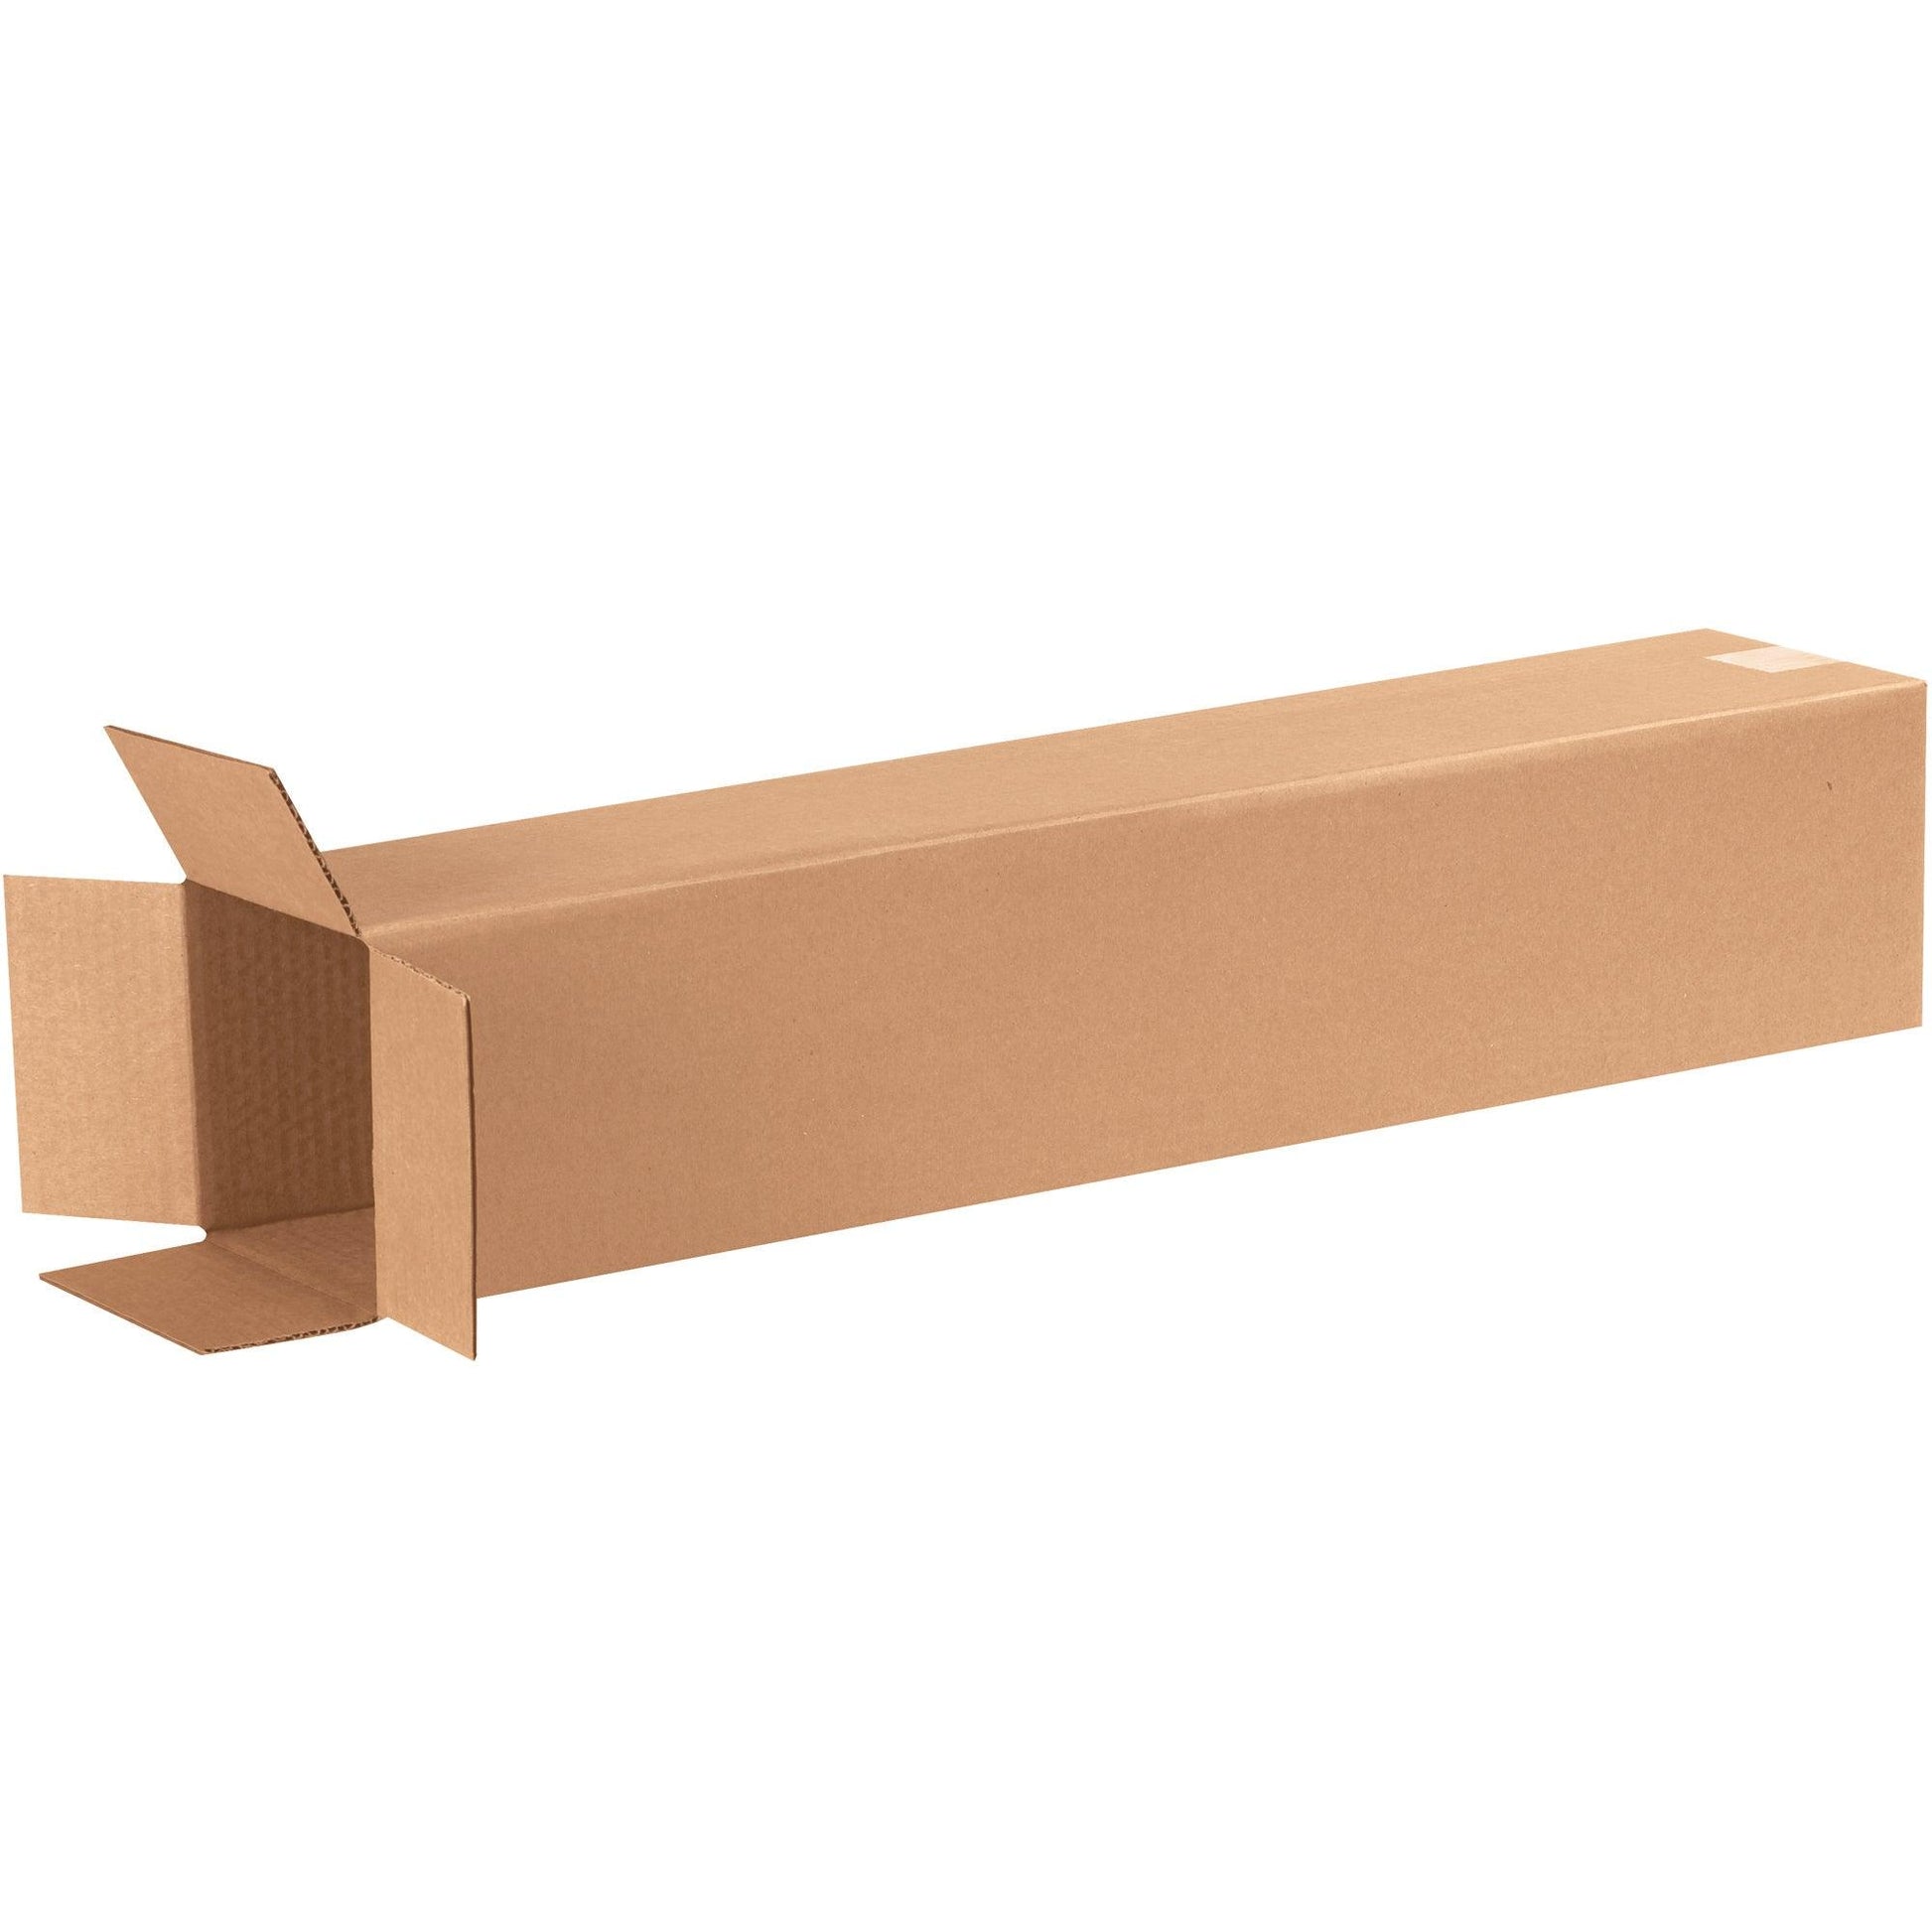 6 x 6 x 30" Tall Corrugated Boxes - 6630